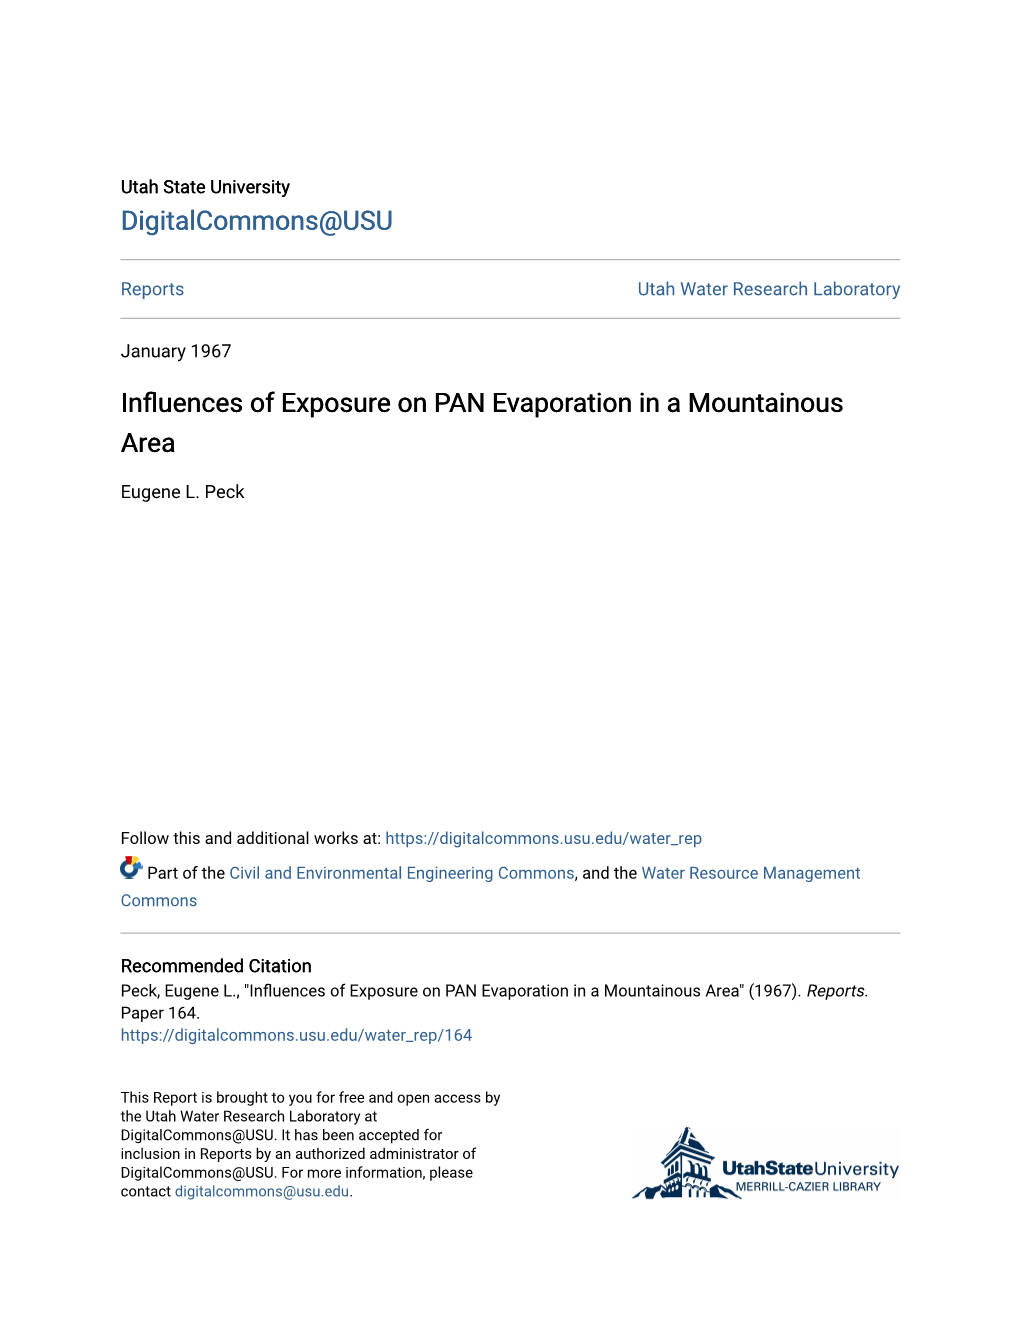 Influences of Exposure on PAN Evaporation in a Mountainous Area